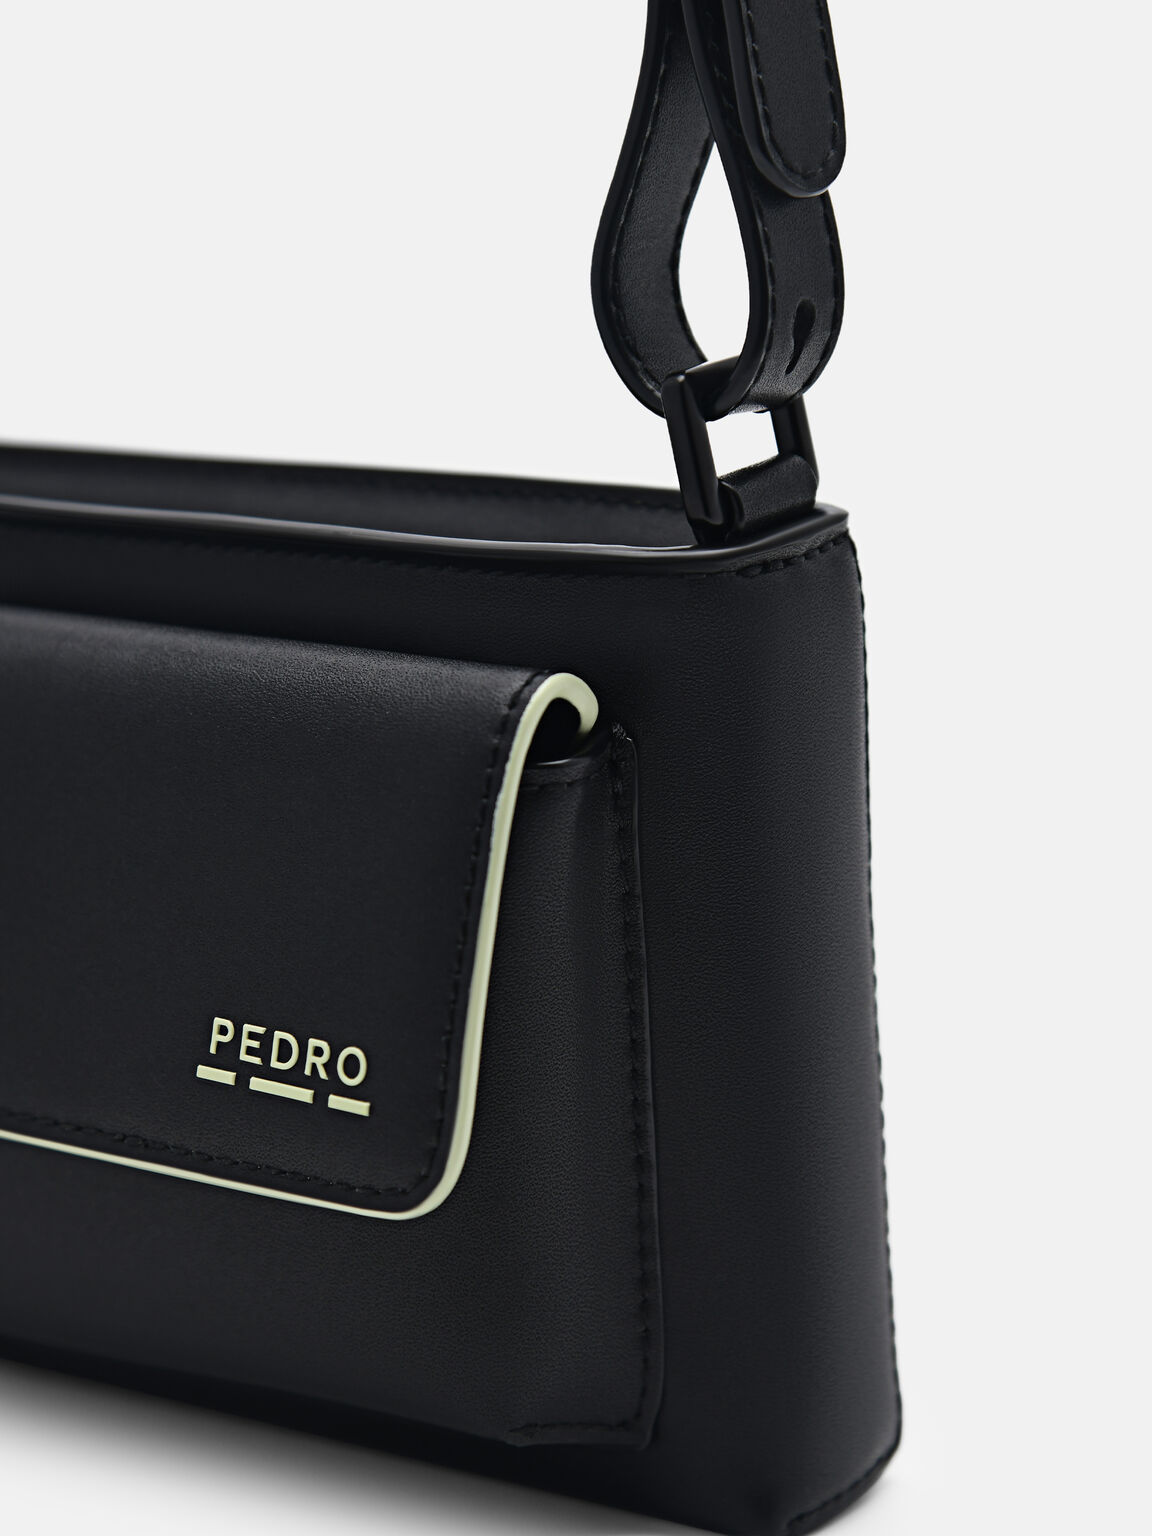 rePEDRO Recycled Leather Mini Sling Bag, Black